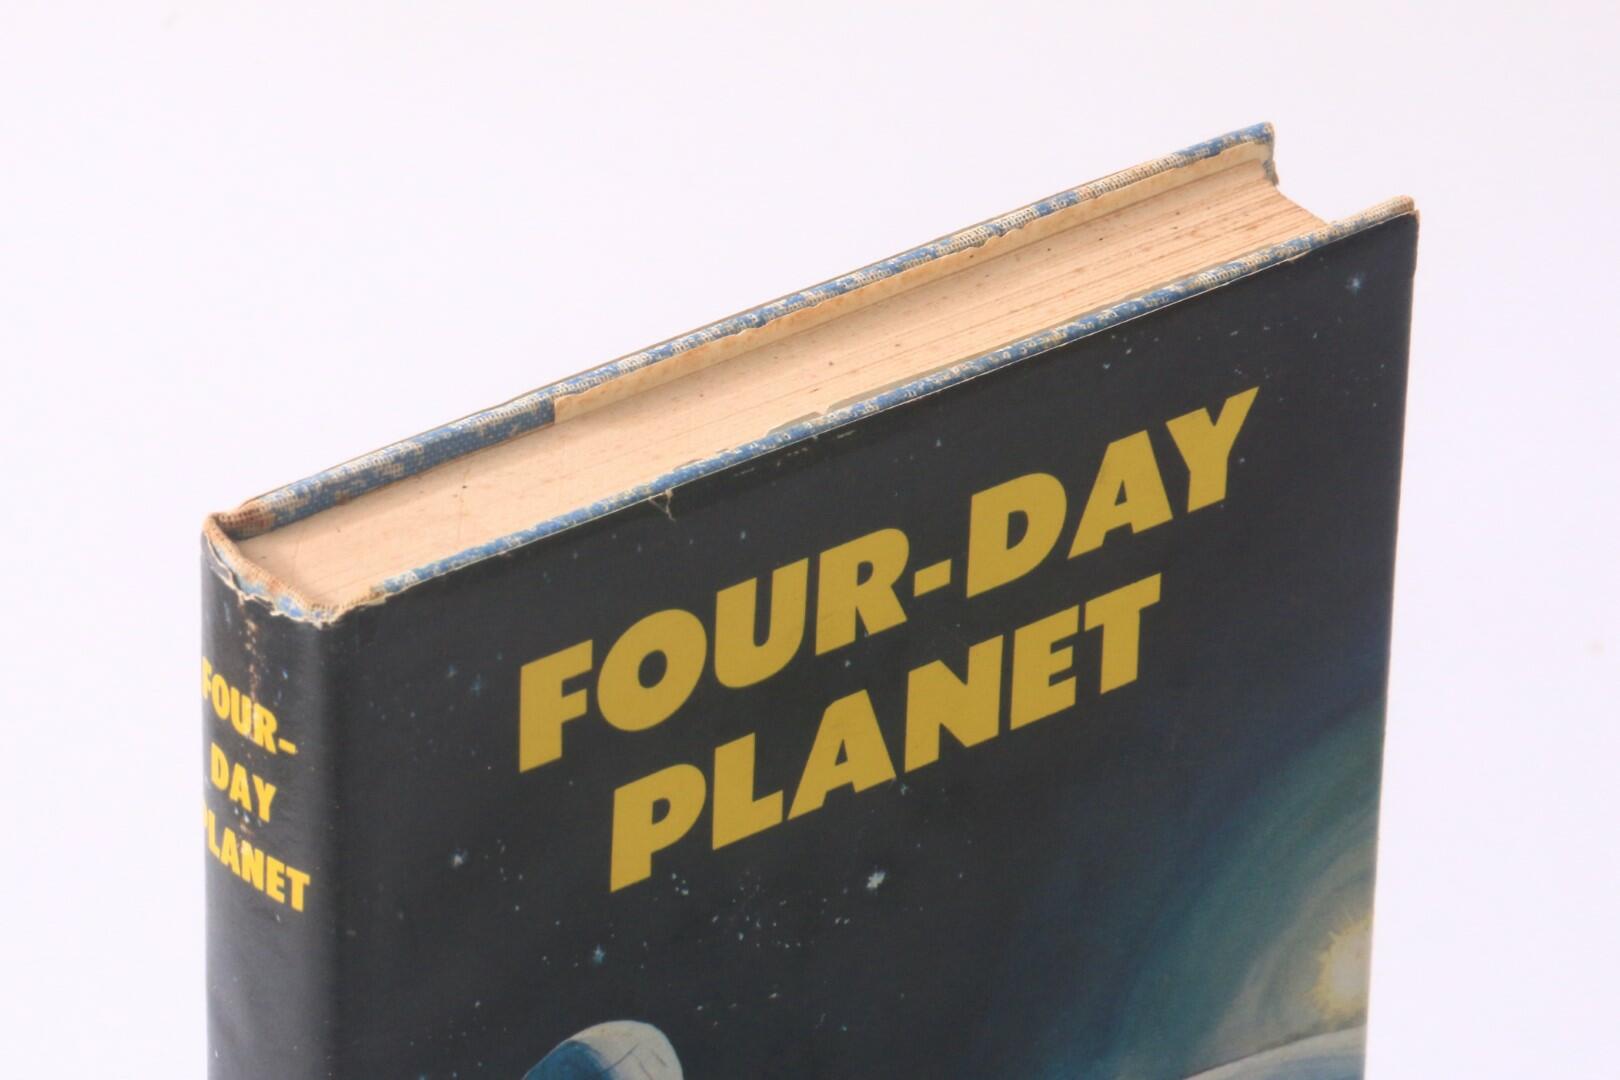 H. Beam Piper - Four-Day Planet - G.P. Putnam, 1961, First Edition.